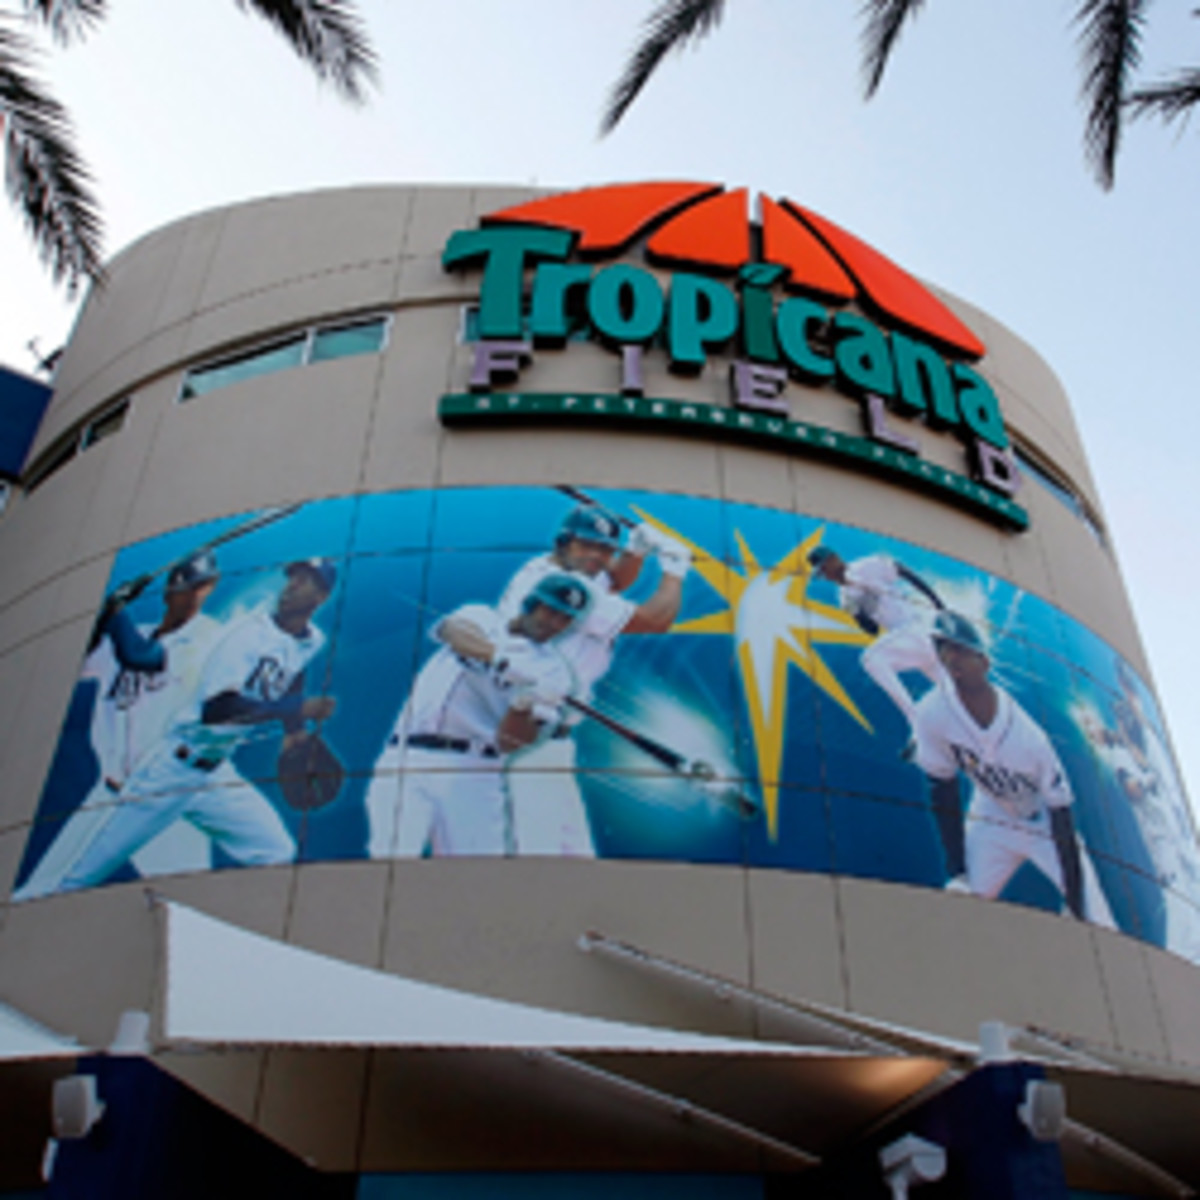 The Rays' Tropicana Field lease prohibits the team from exploring a new stadium outside of St. Petersburg. (J. Meric/Getty Images)